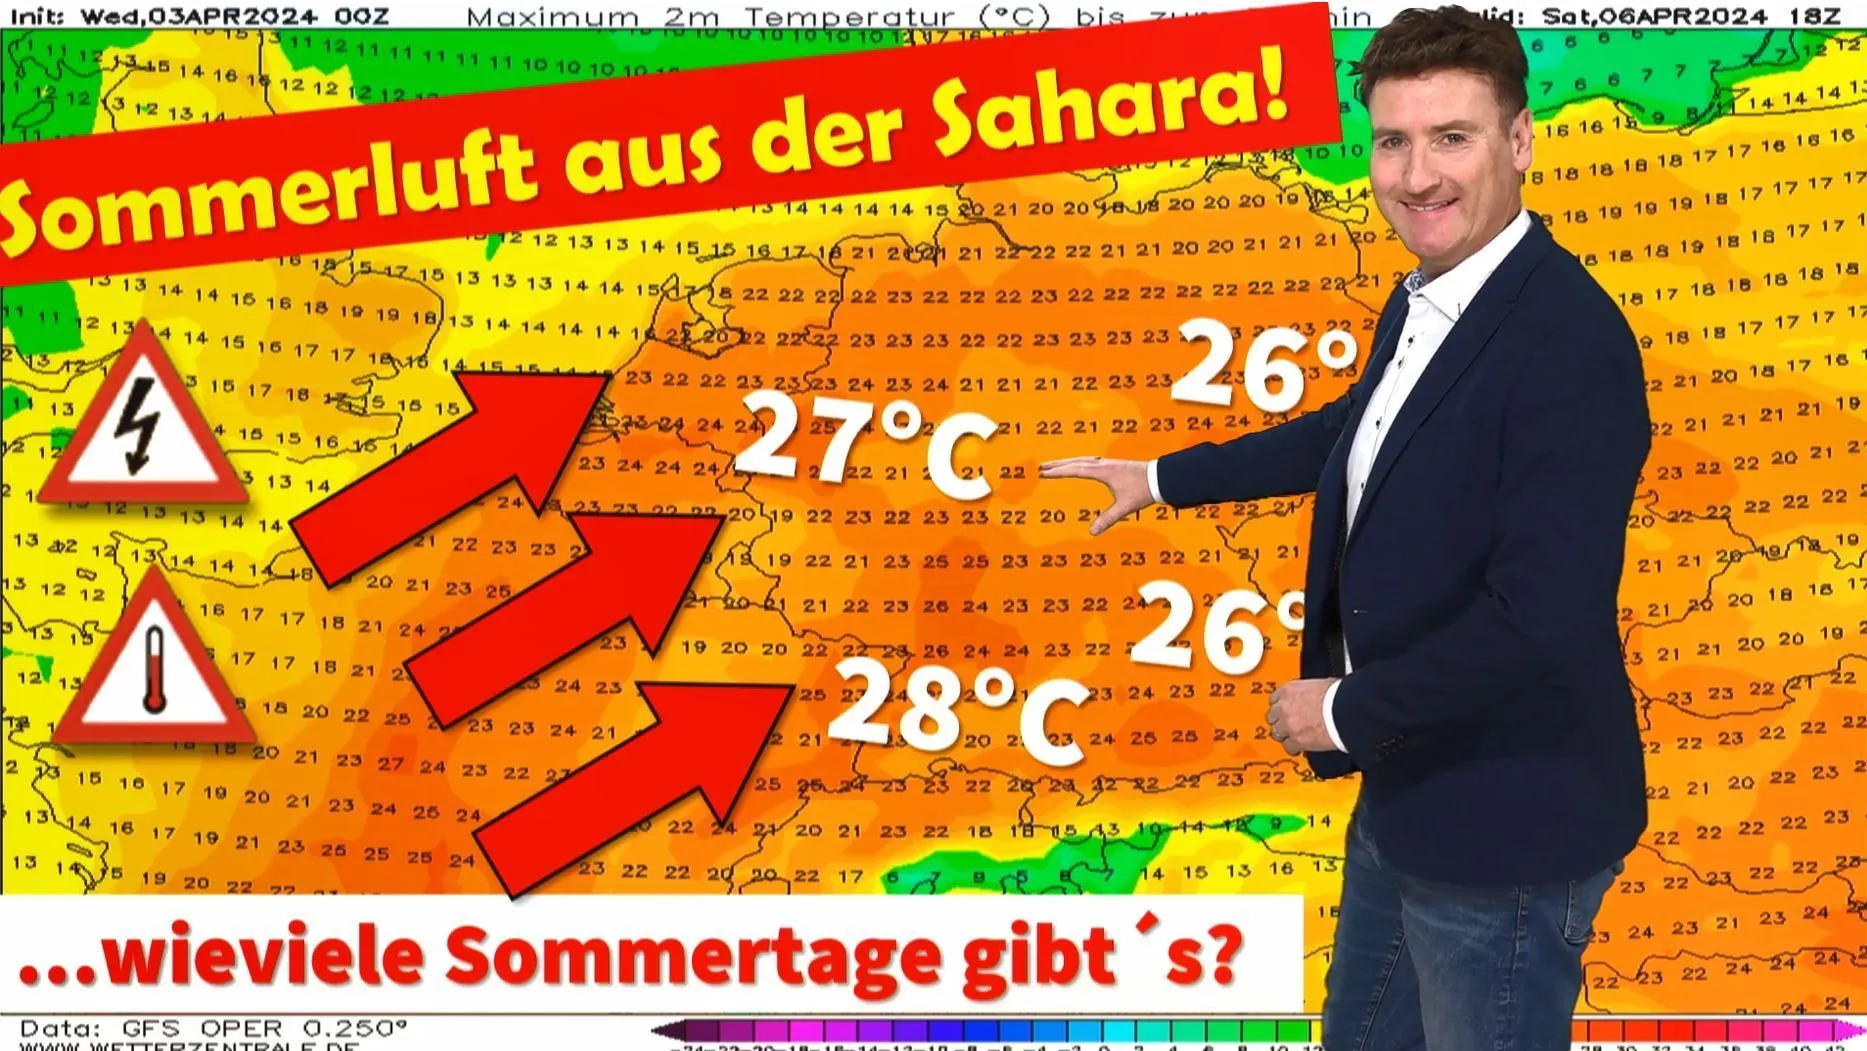 Over 25s weather from Saturday! Unbelievable: summer weather at the beginning of April! How long will it stay warm and summery in Germany?